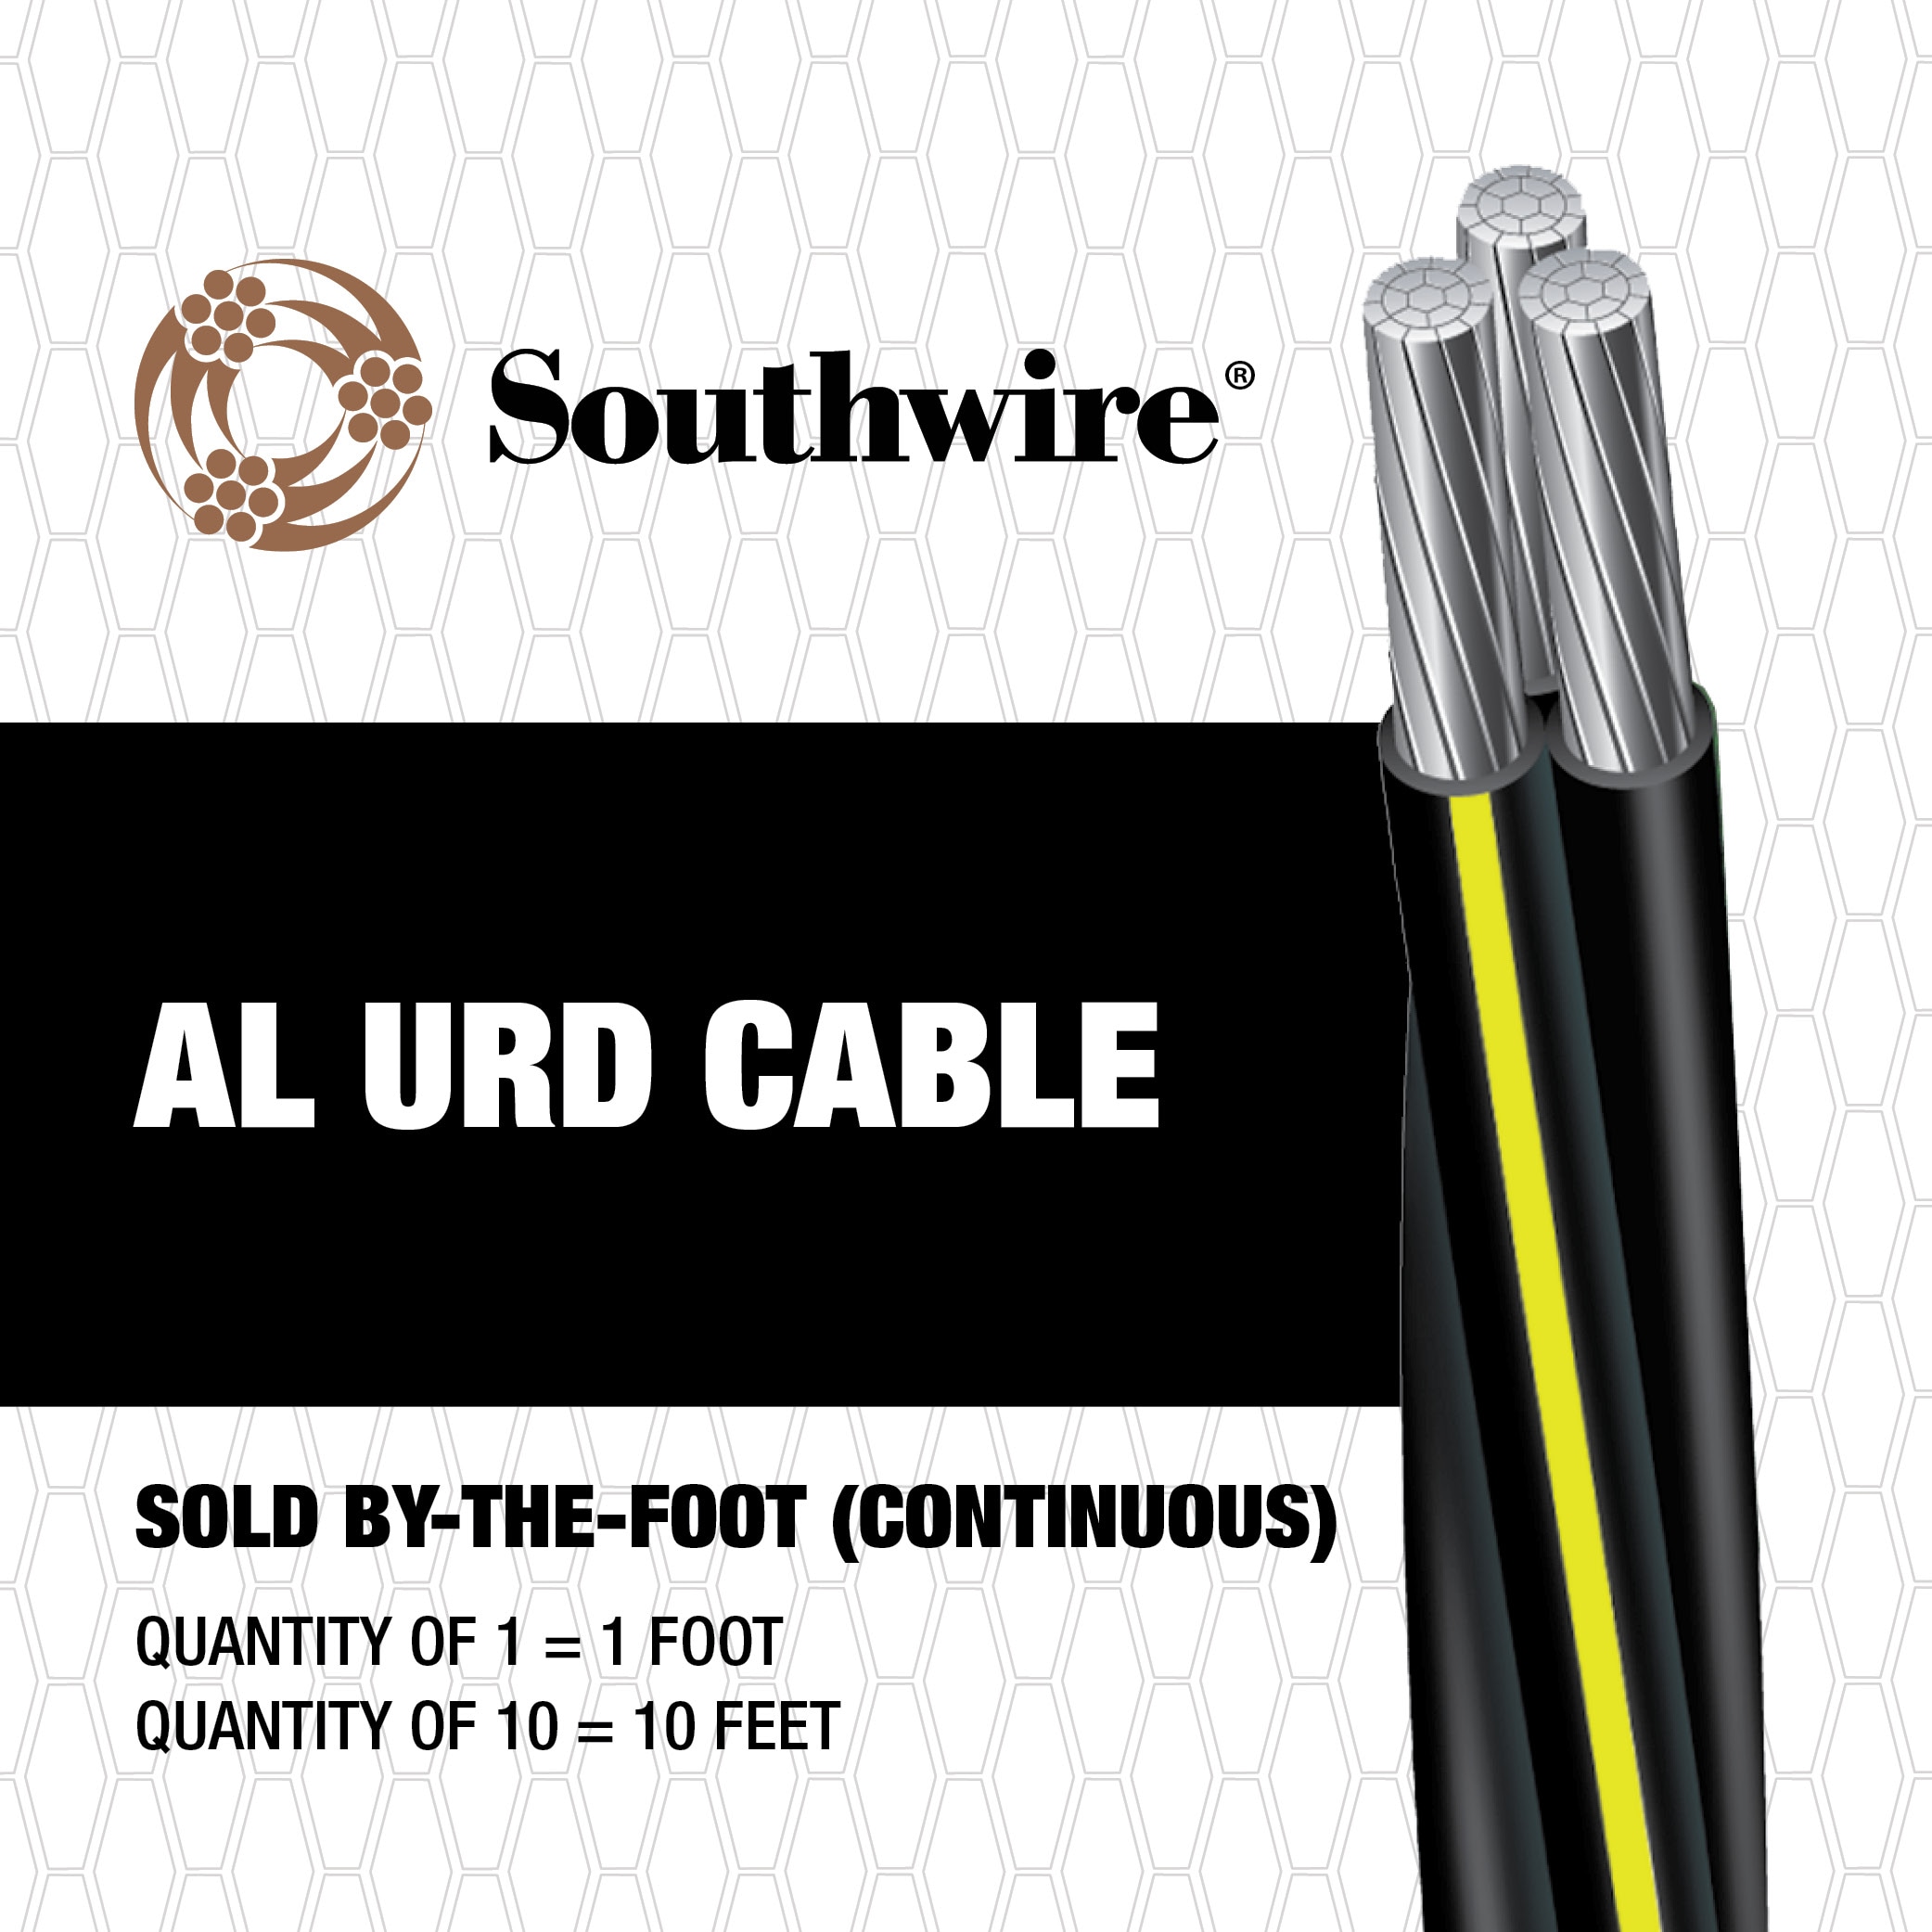 Southwire RAMAPO 2-2-2 Aluminum Urd Service Entrance Cable (By-the